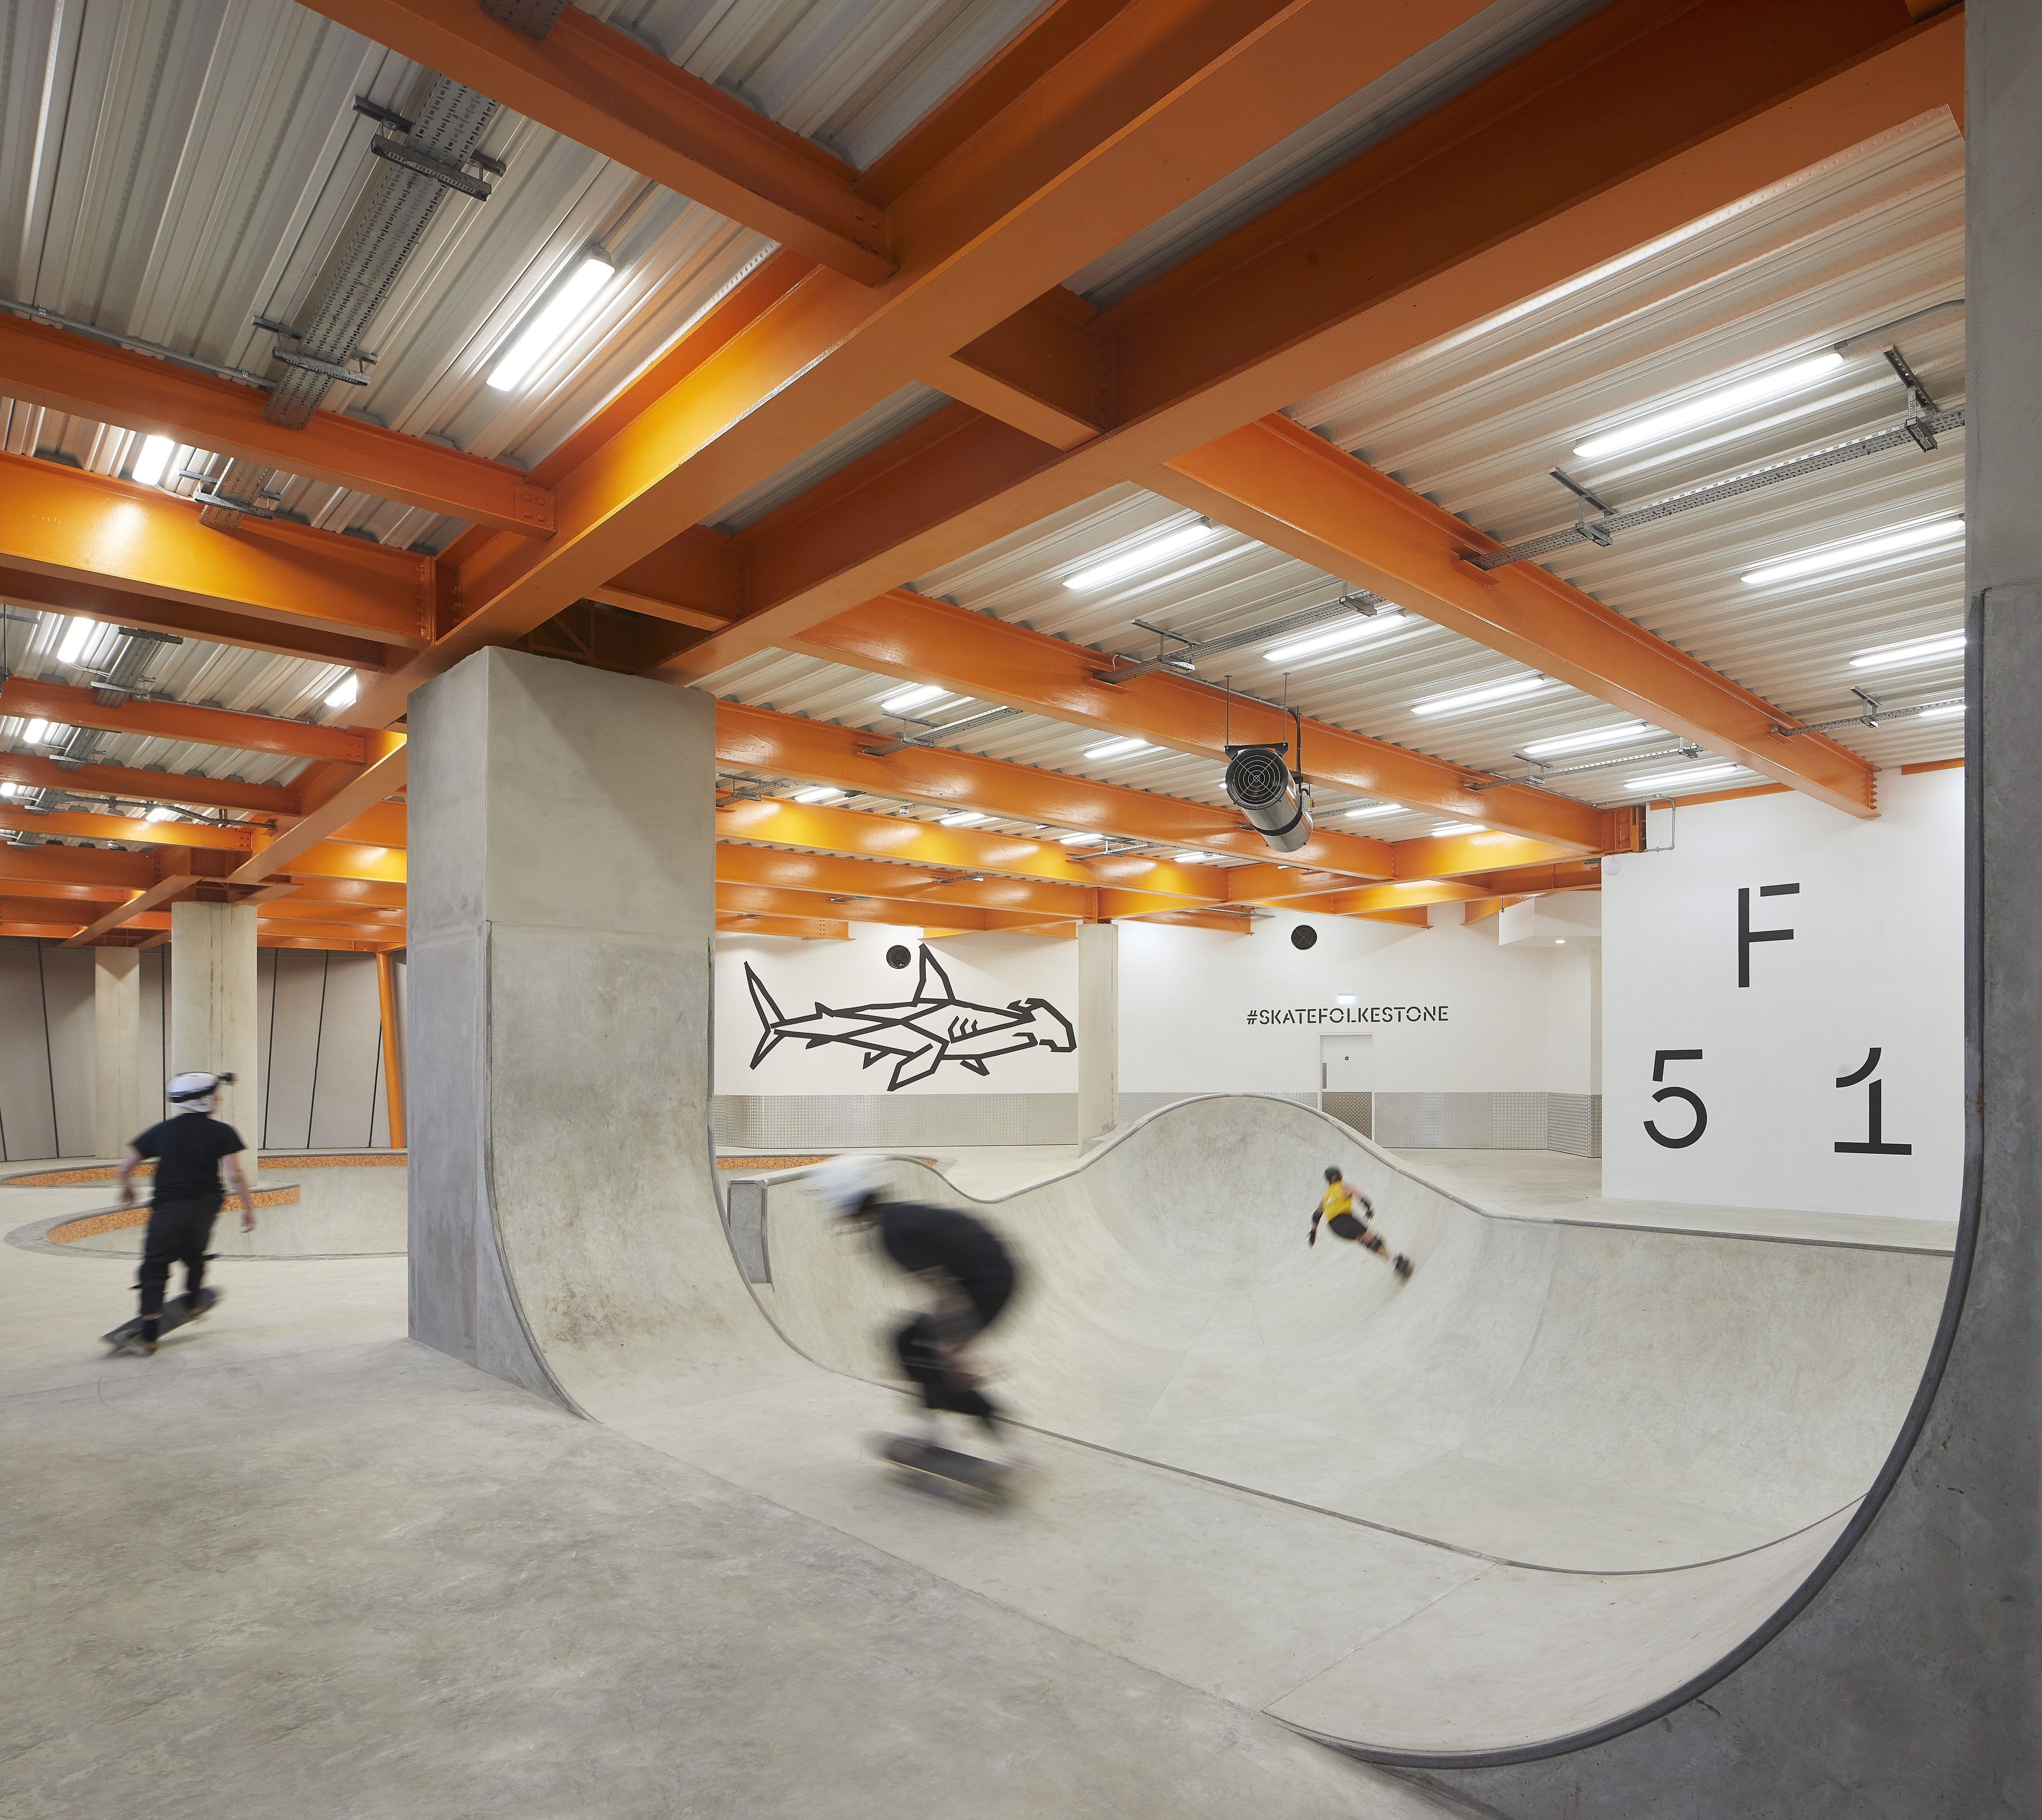 British multistorey skatepark F51could be the perfect blueprint for facilities in dense urban areas like Hong Kong, where skateboarding is booming but space is expensive. Photo: Hufton + Crow